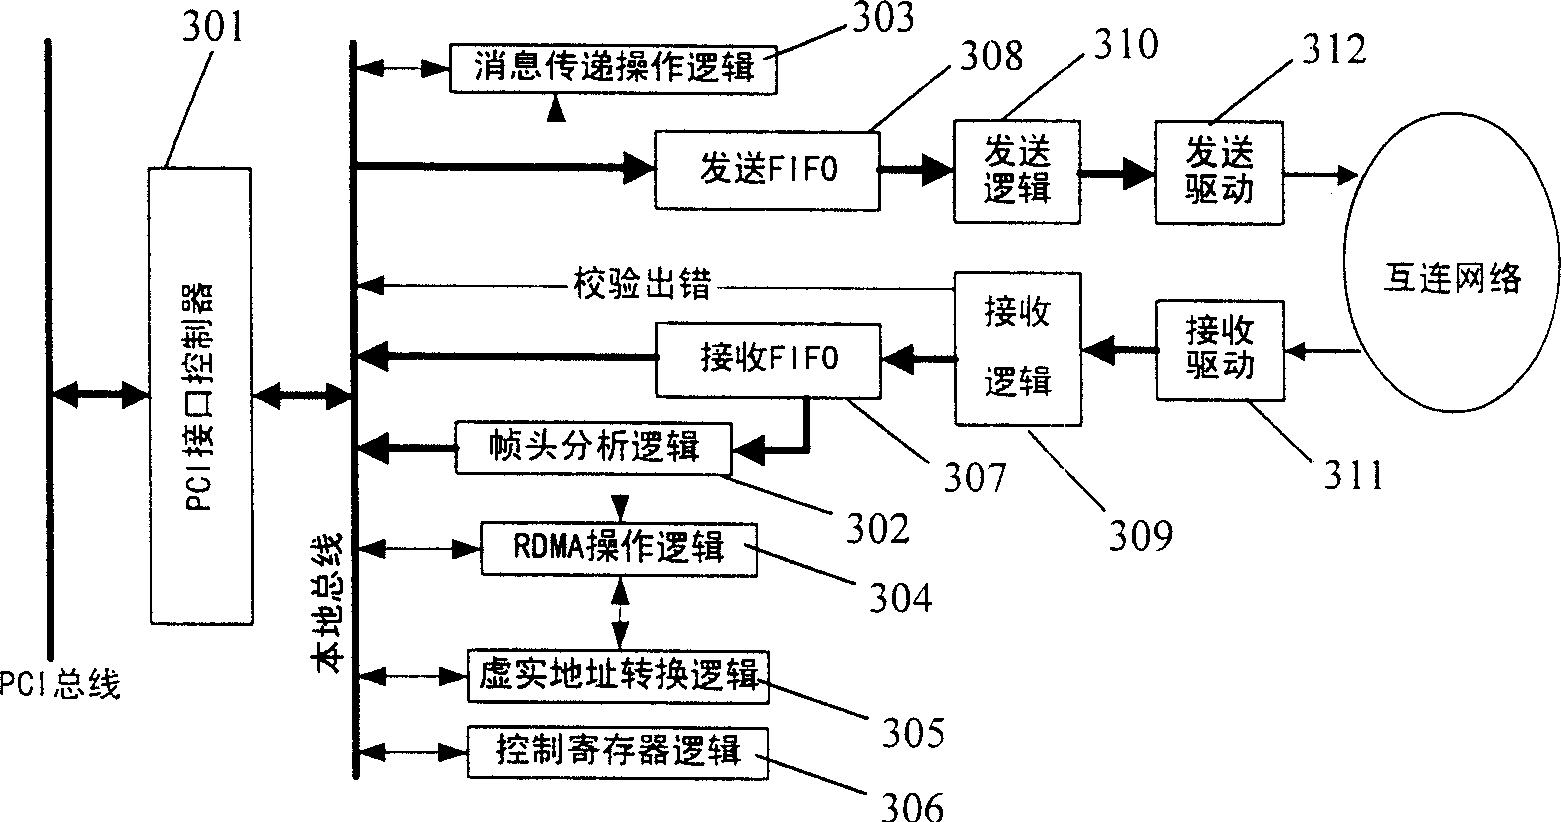 Remote page access method for use in shared virtual memory system and network interface card